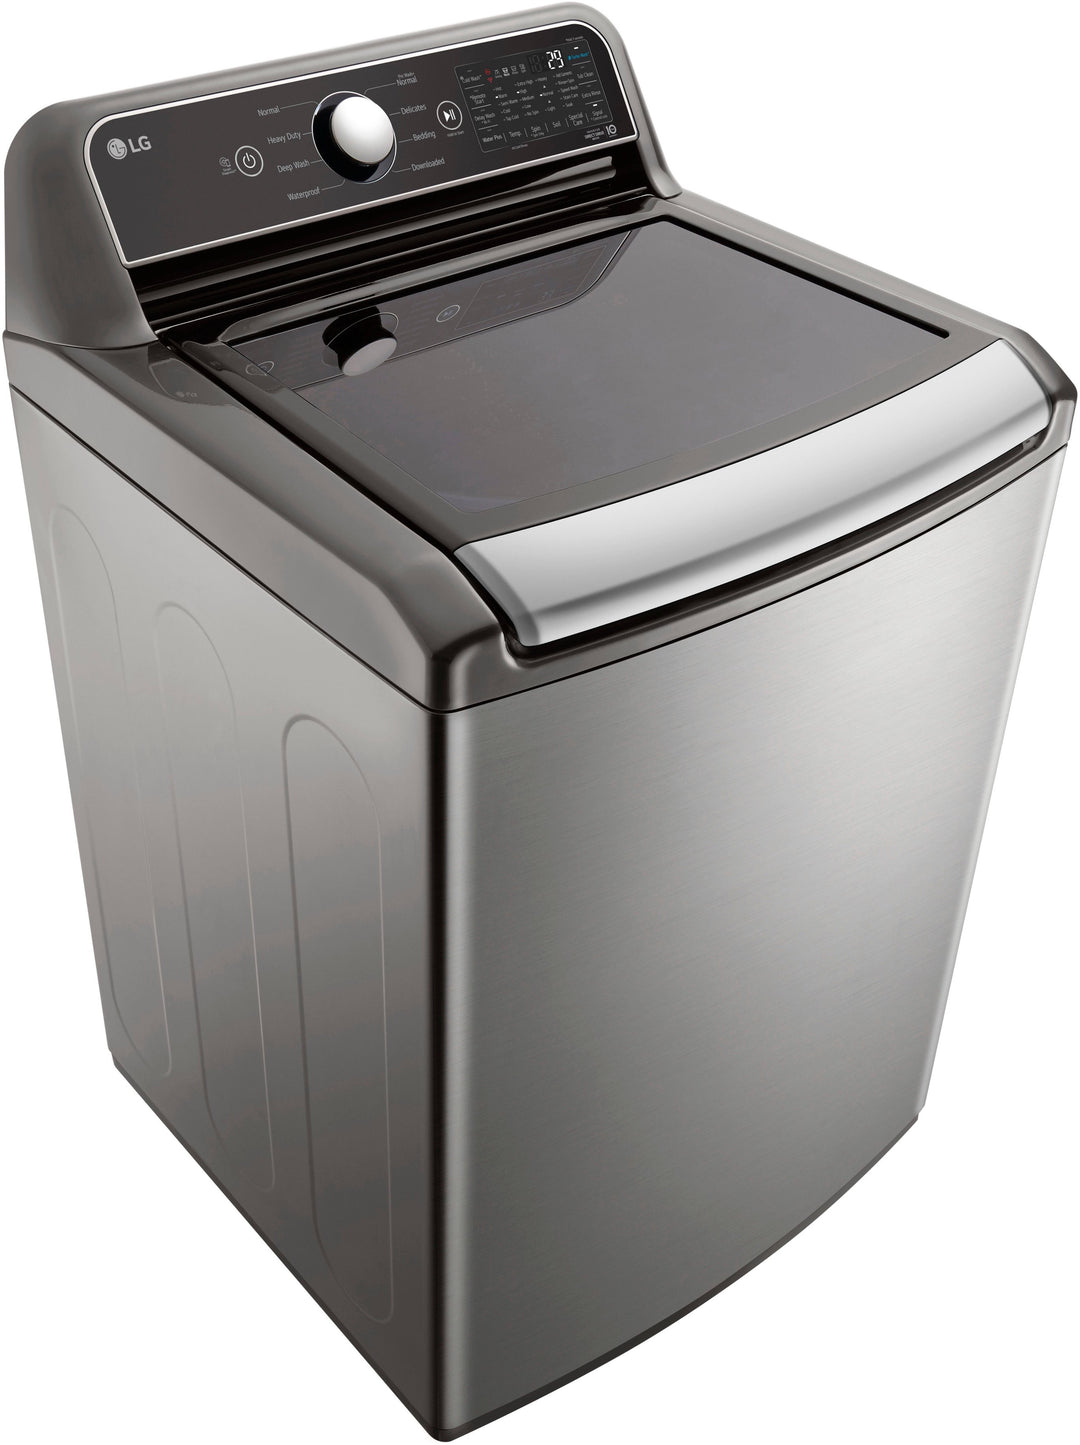 LG - 5.5 Cu. Ft. Smart Top Load Washer with TurboWash3D - Graphite steel_10